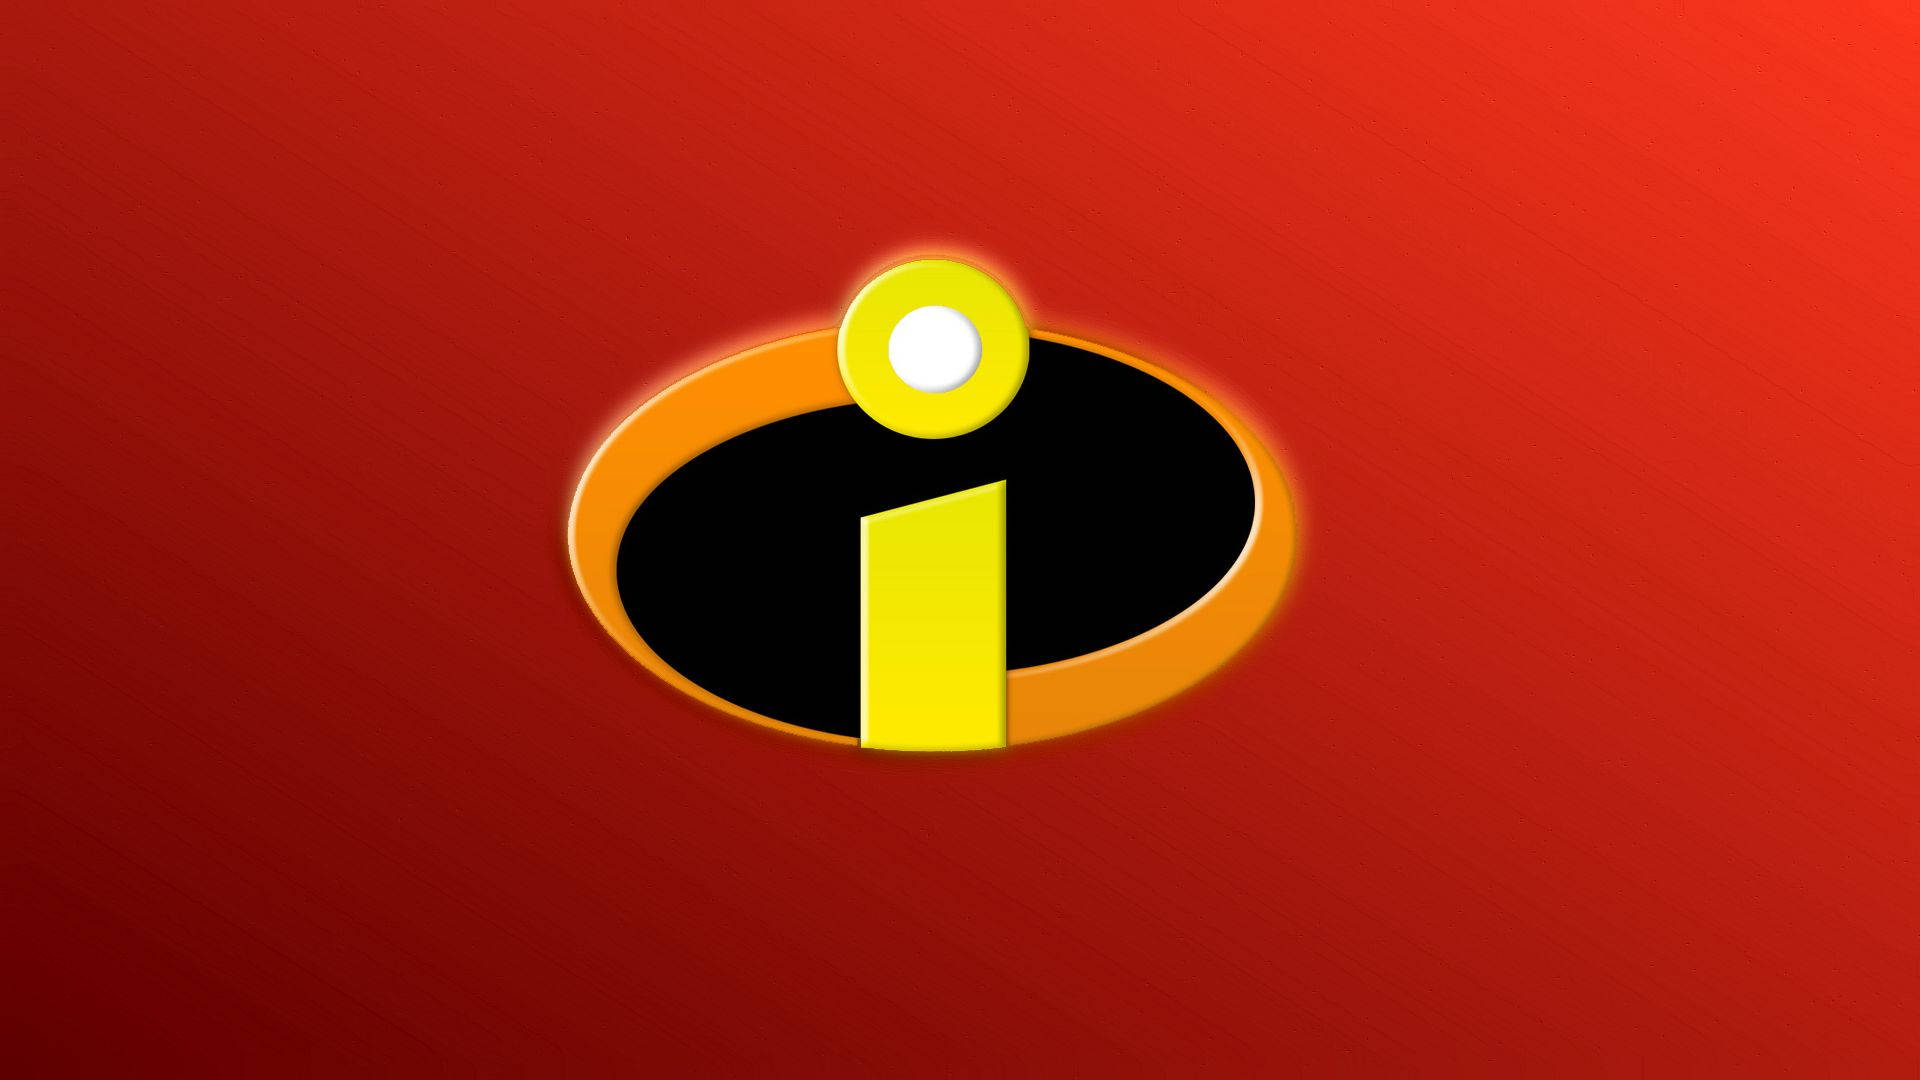 The Incredibles Symbol Background